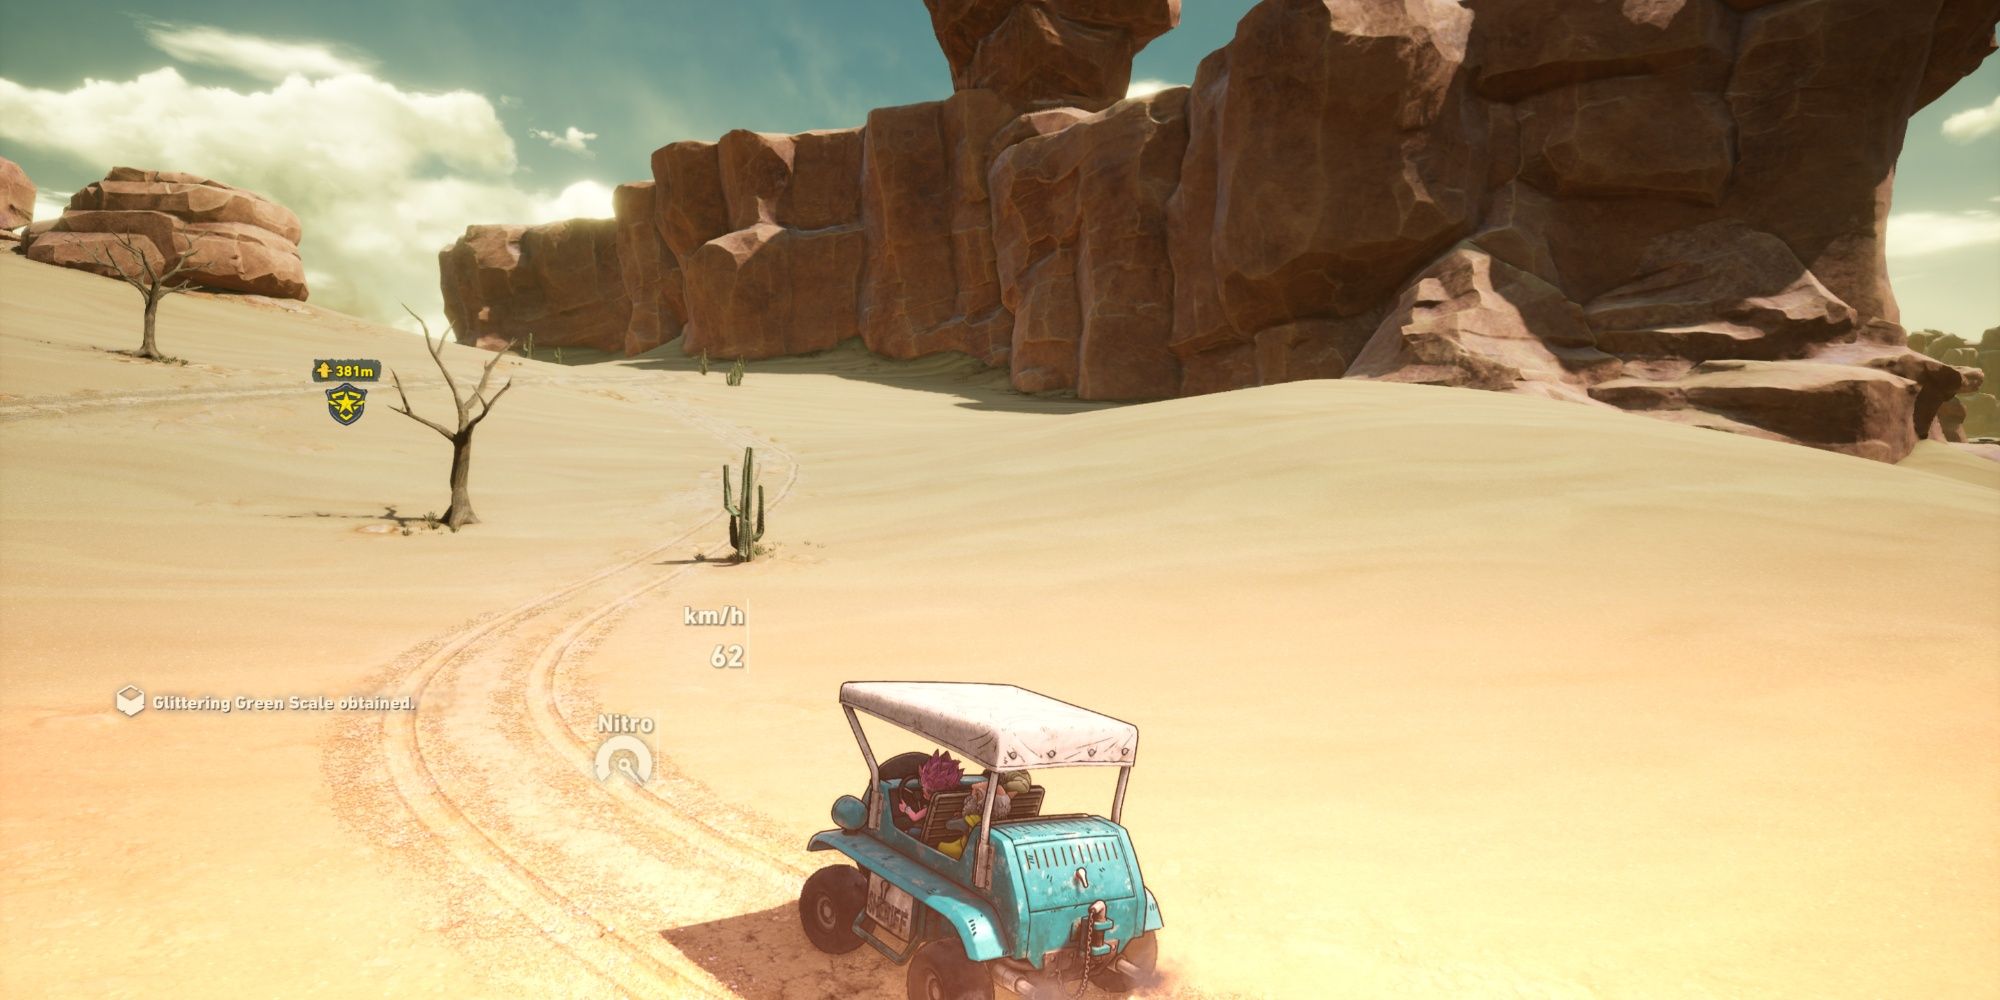 Exploring in your car in Sand Land